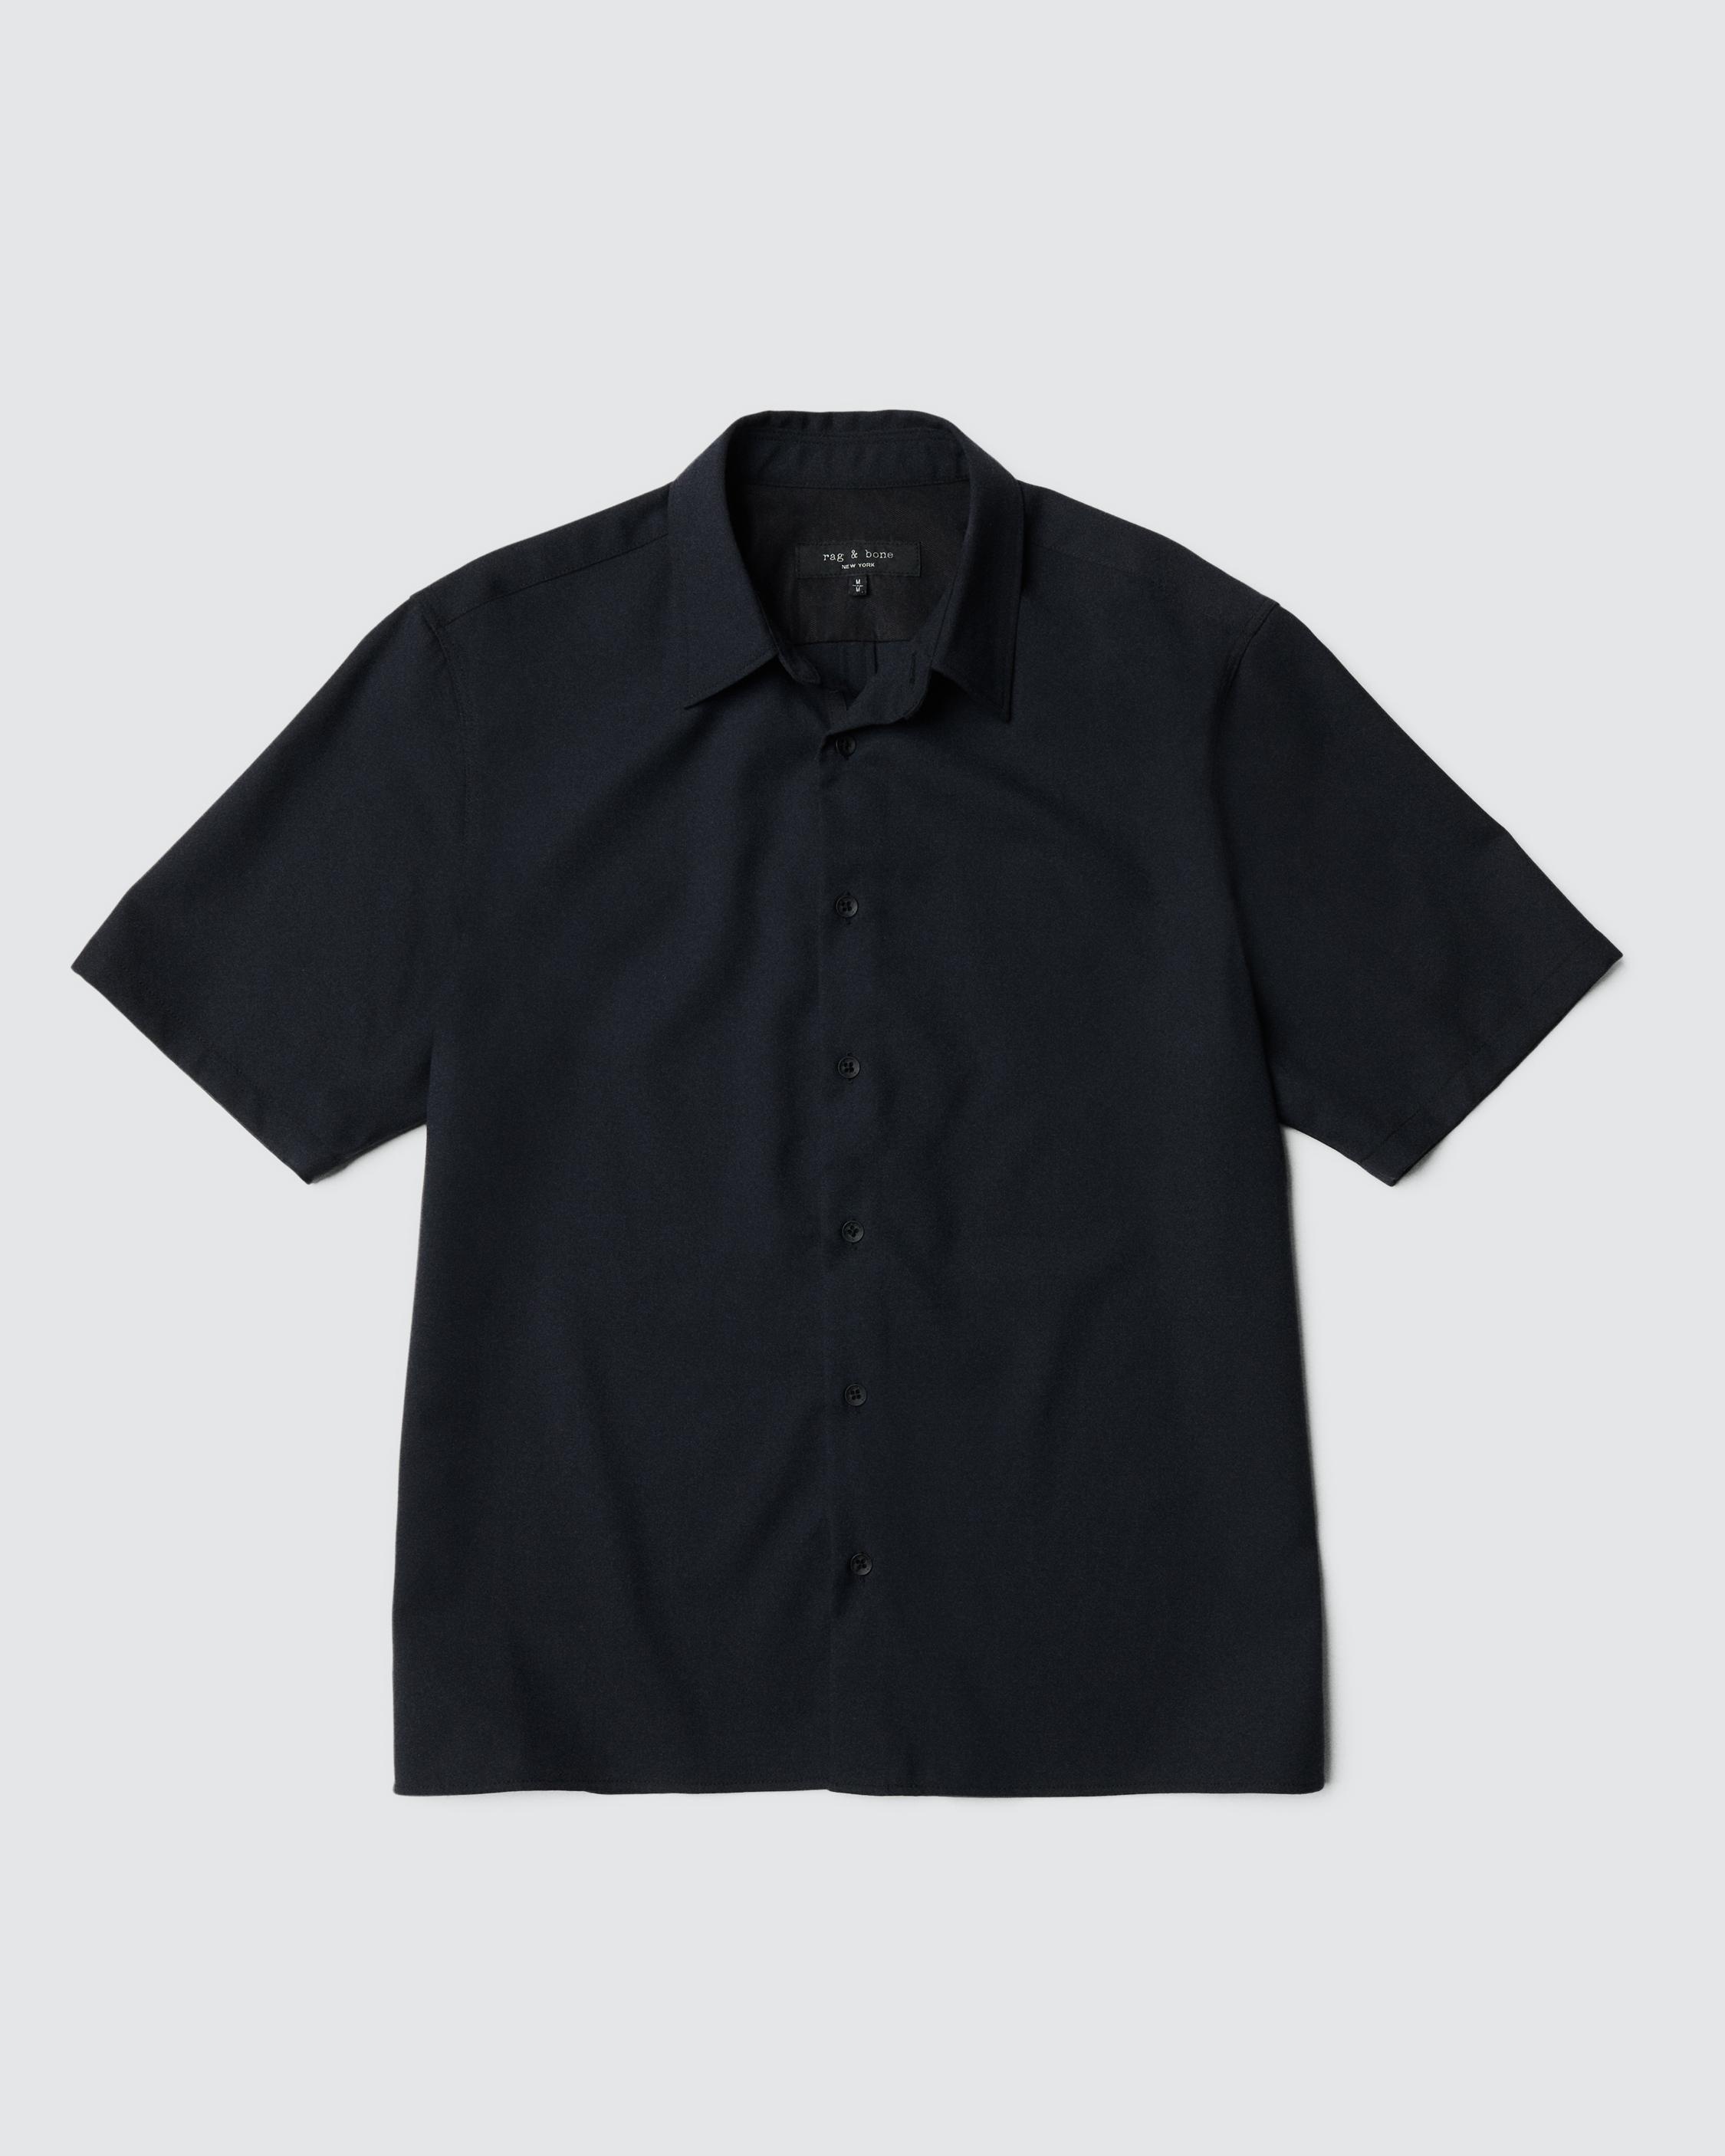 Dalton Crepe Wool Shirt
Relaxed Fit Button Down - 1